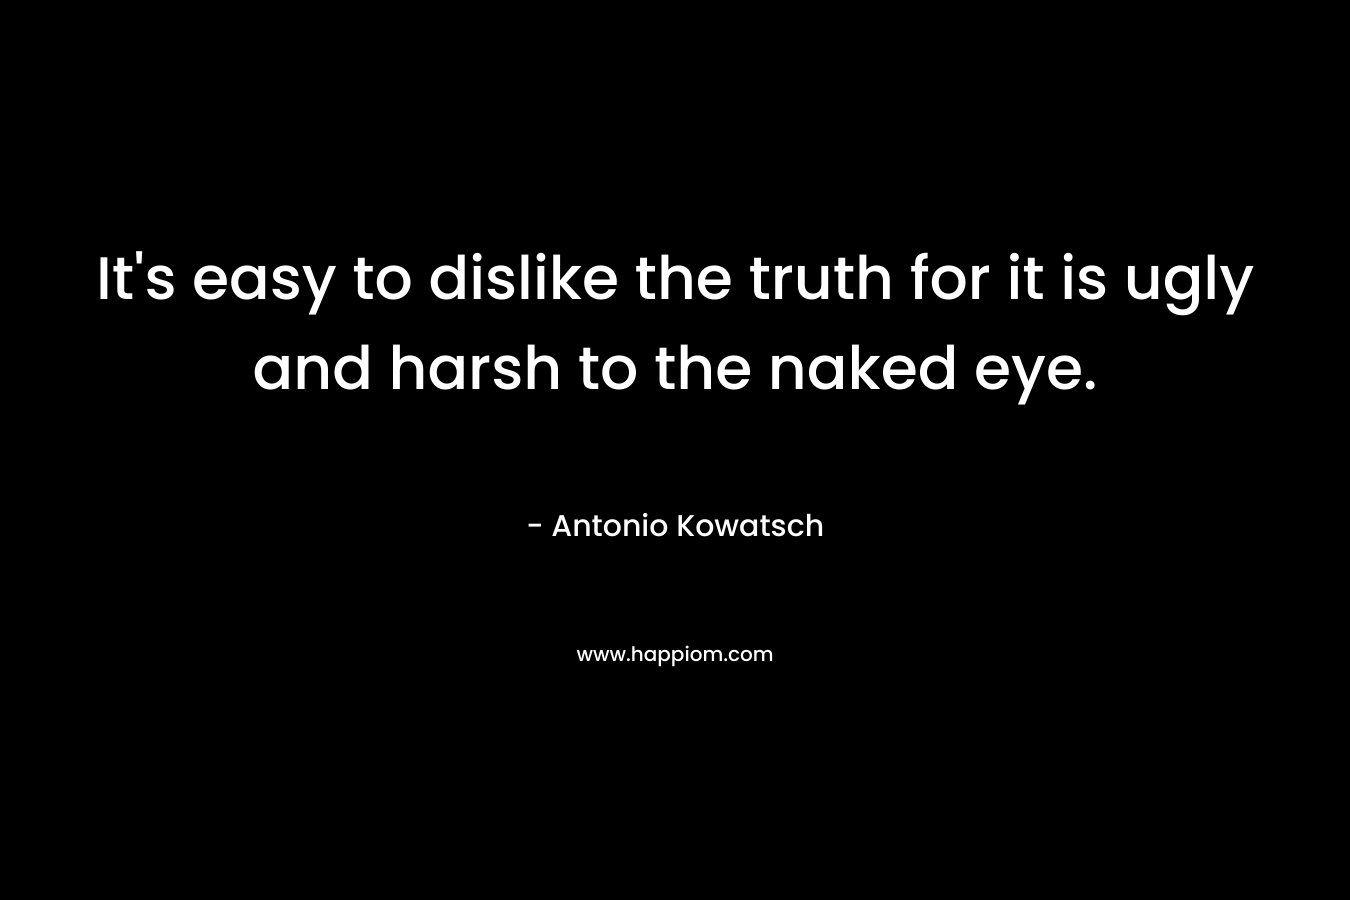 It’s easy to dislike the truth for it is ugly and harsh to the naked eye. – Antonio Kowatsch